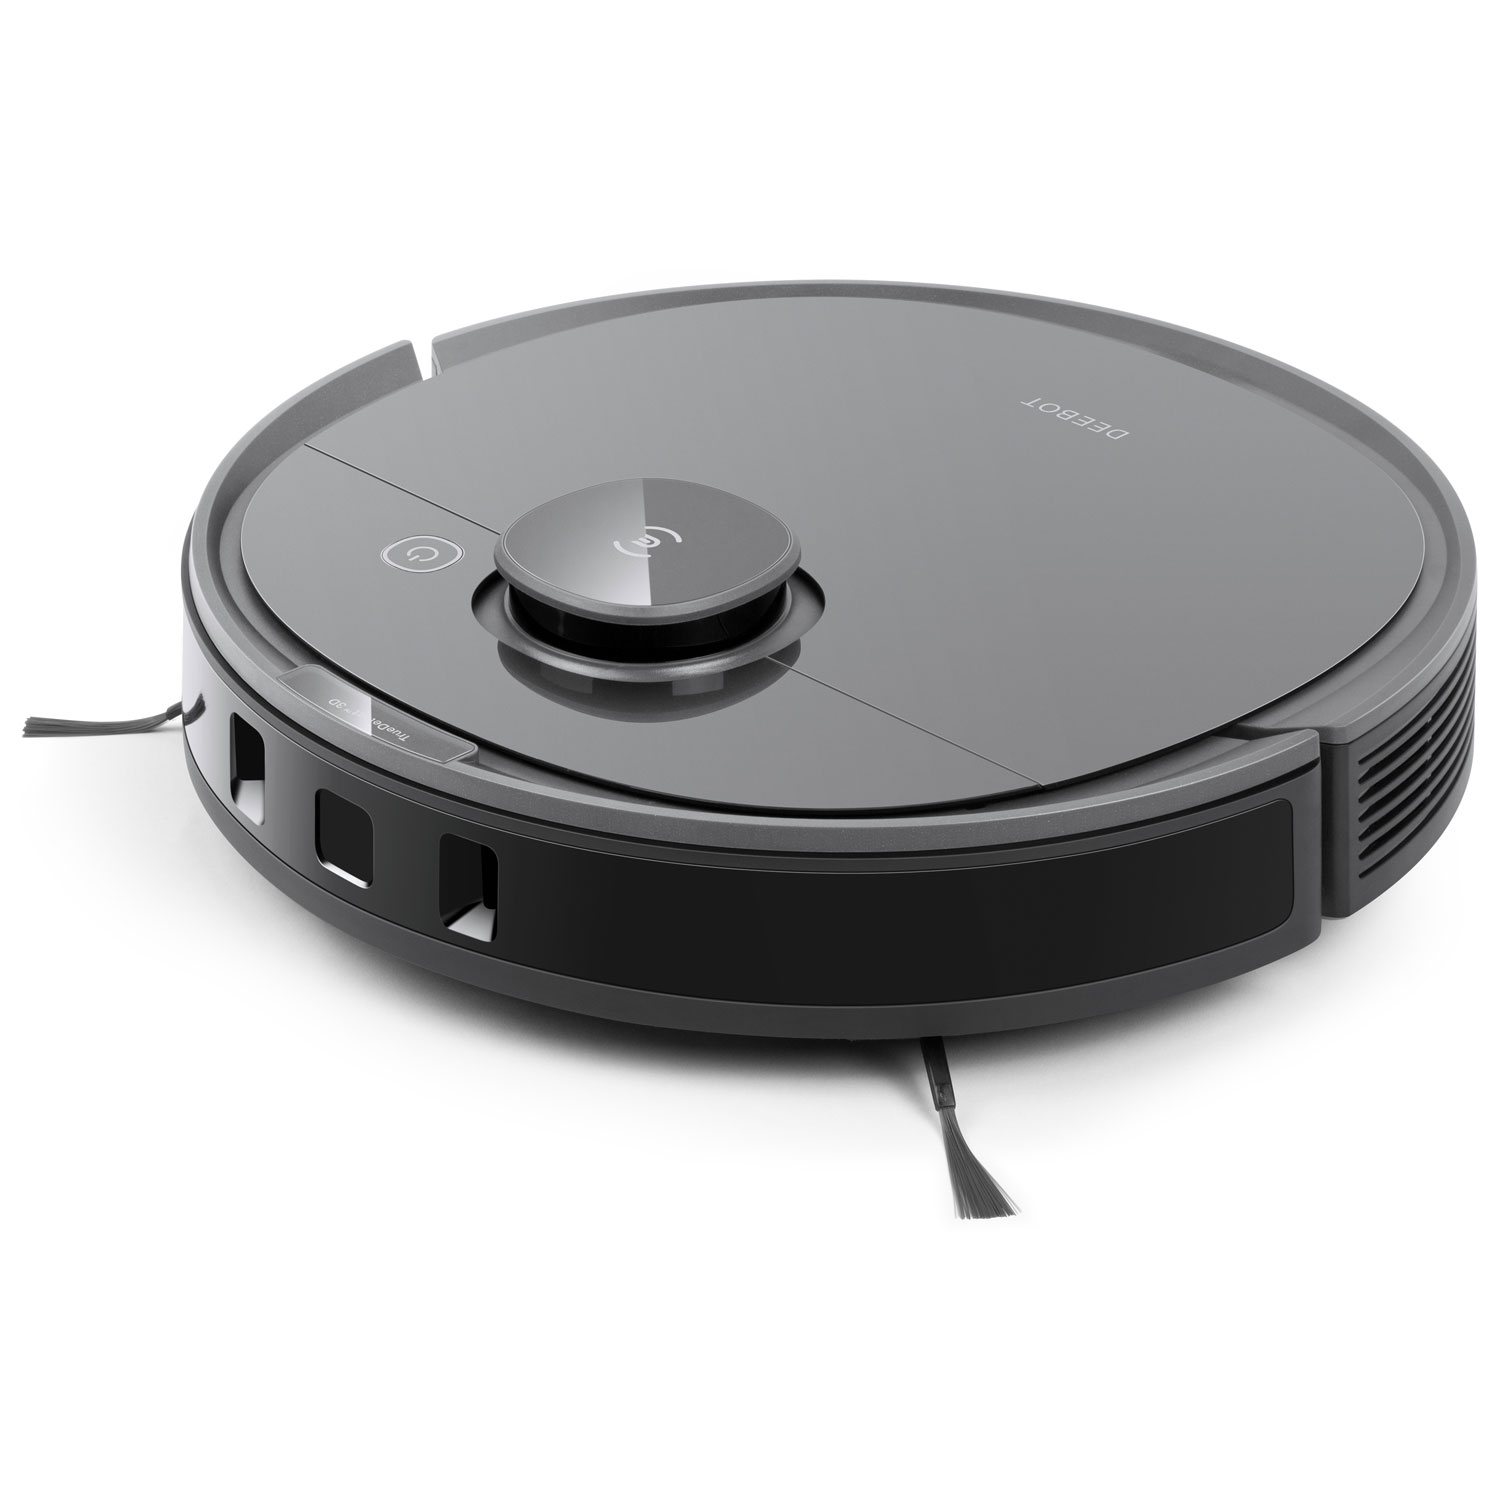 Ecovacs Deebot Ozmo T8+ Mopping Robot Vacuum - Grey | Best Buy Canada